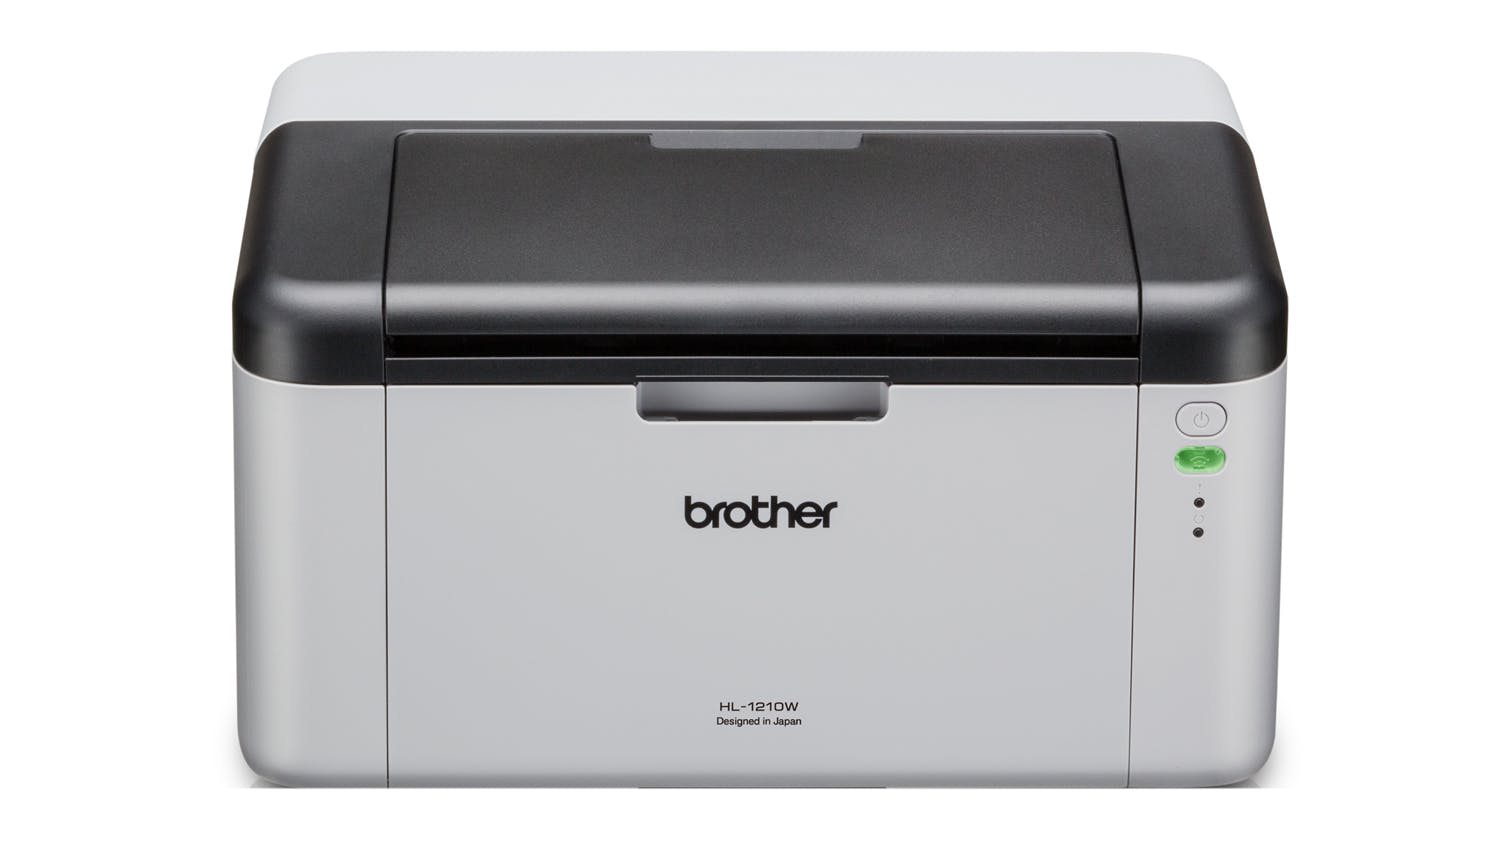 Brother hl 1210w. Brother 1210wr. Brother hl-1210w Series. Принтер brother hl 5100dn. Brother принтер 1210.